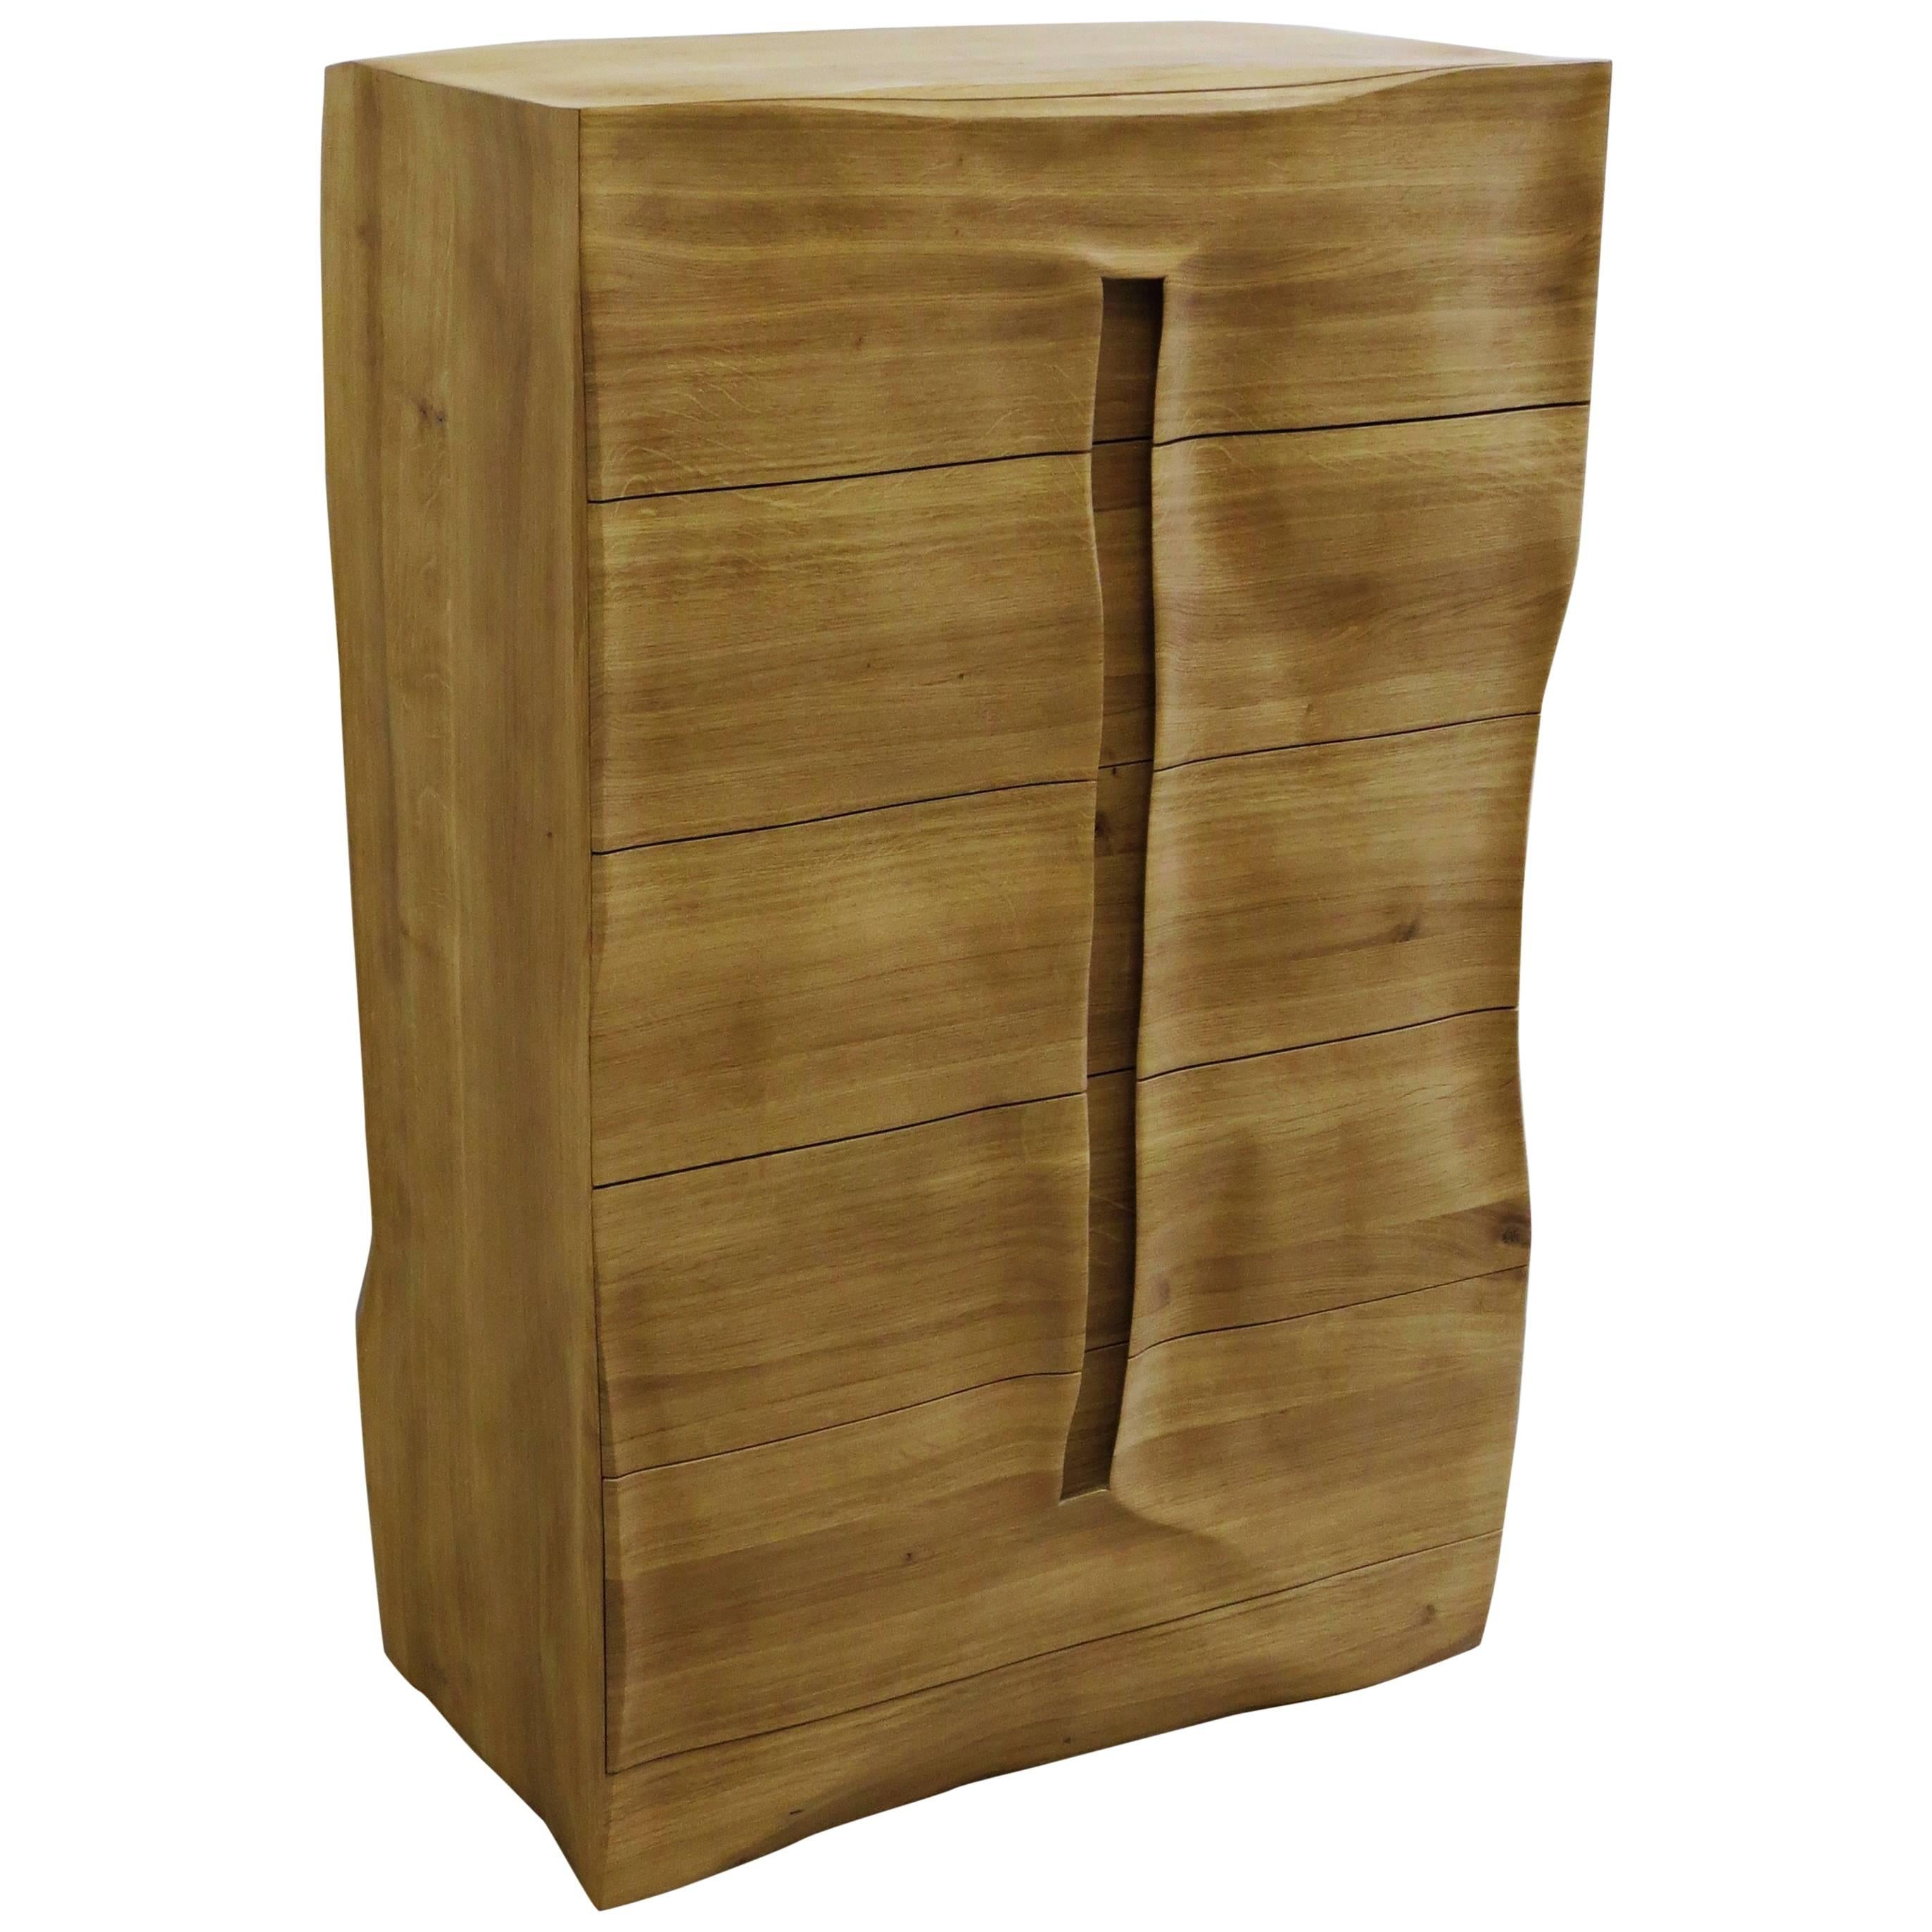 Dresser "the groove" Handmade in Organic Design, also as a sideboard, solid wood